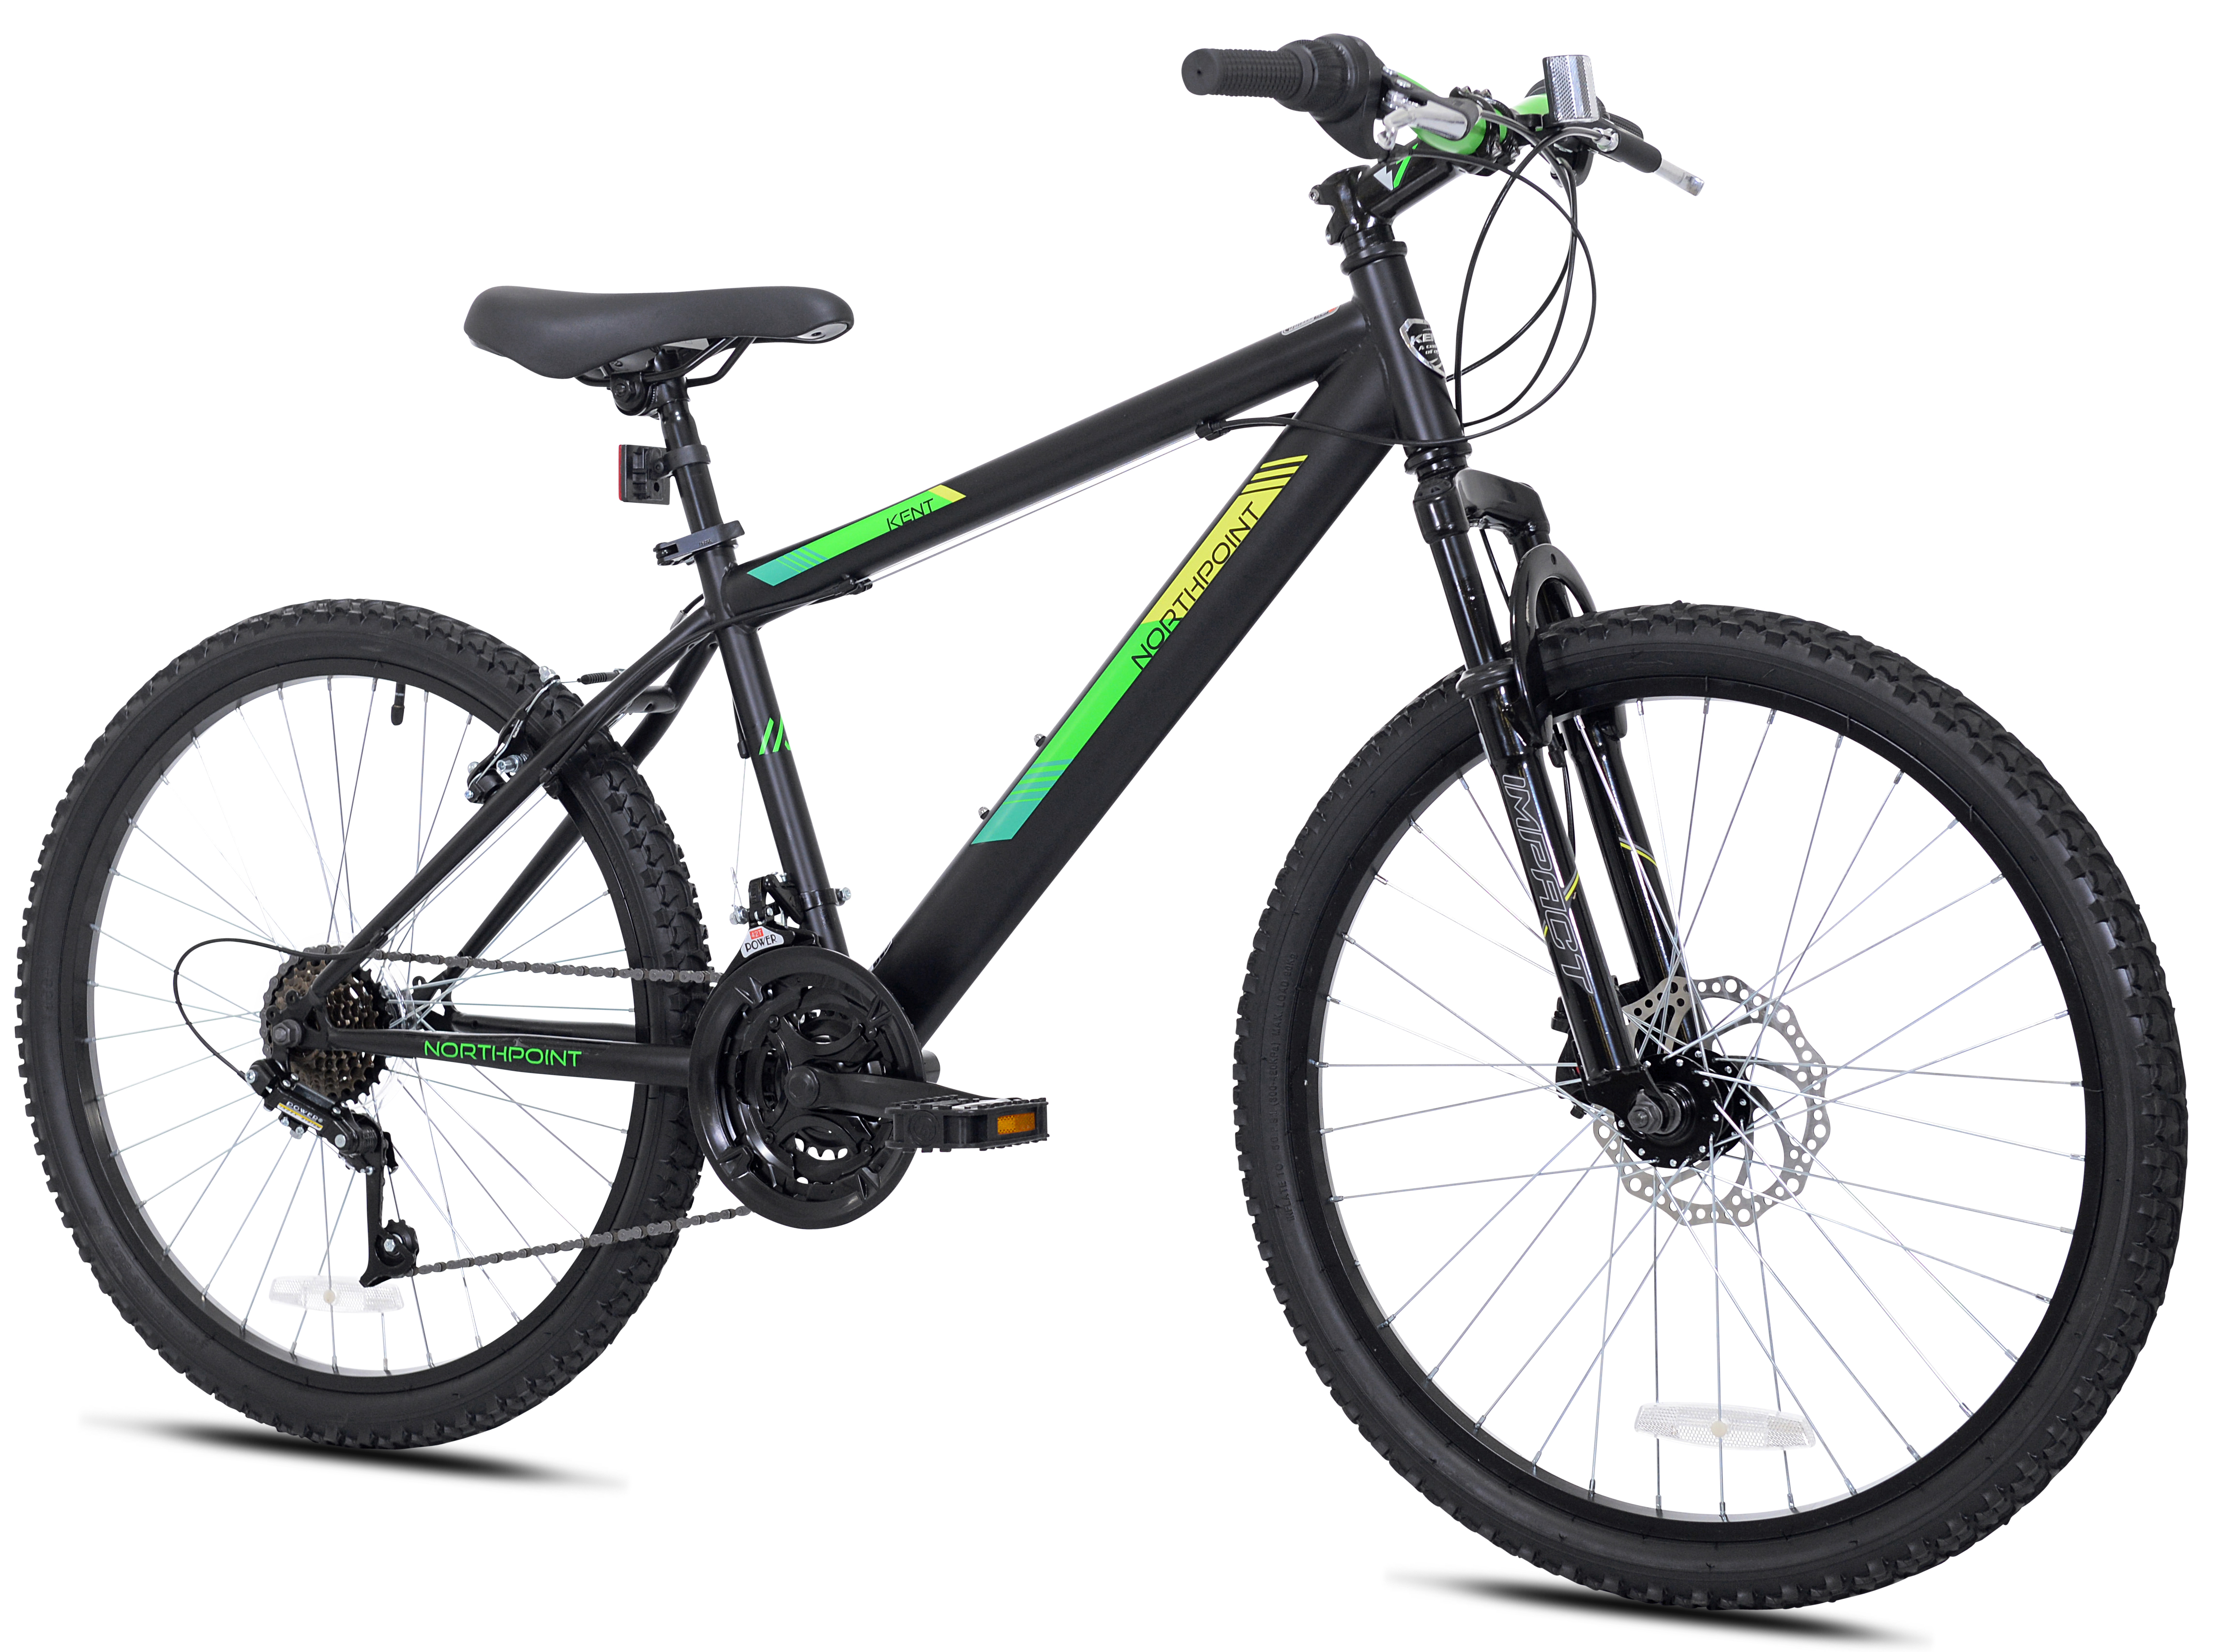 Kent 24" Northpoint Boy's Mountain Bike, Black/Green - image 2 of 9